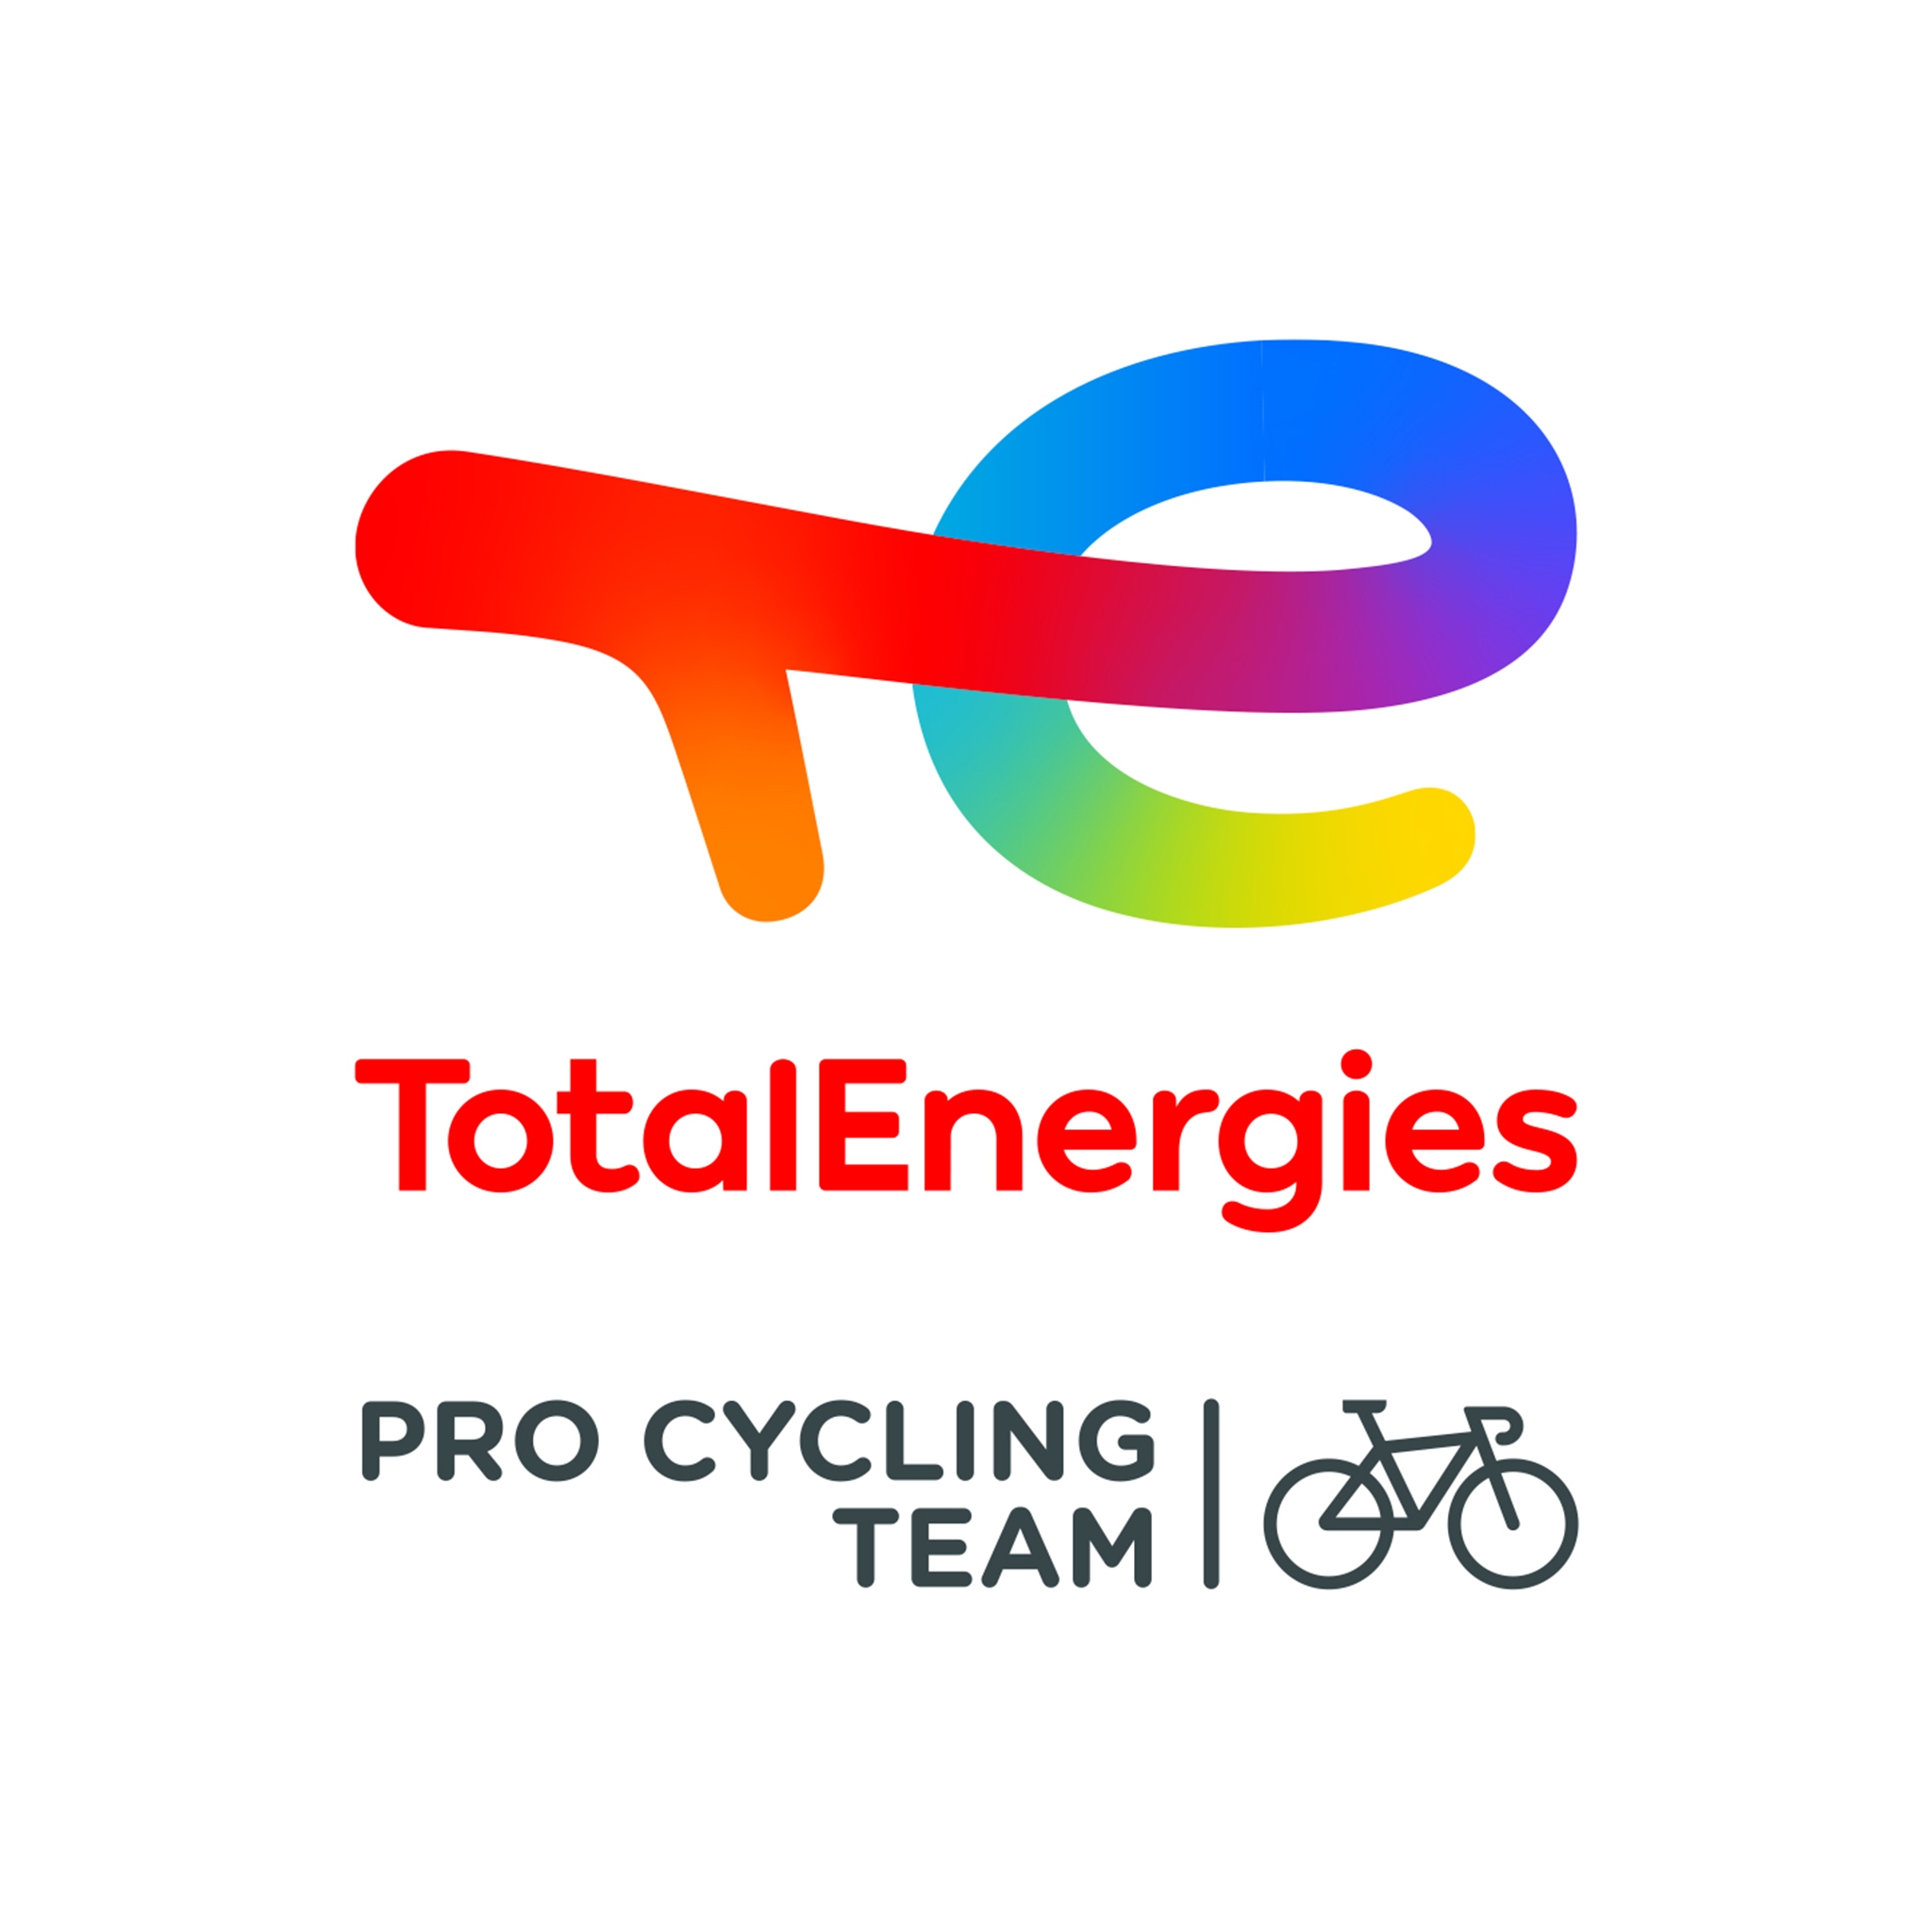 Total Energie Pro Cycling Team